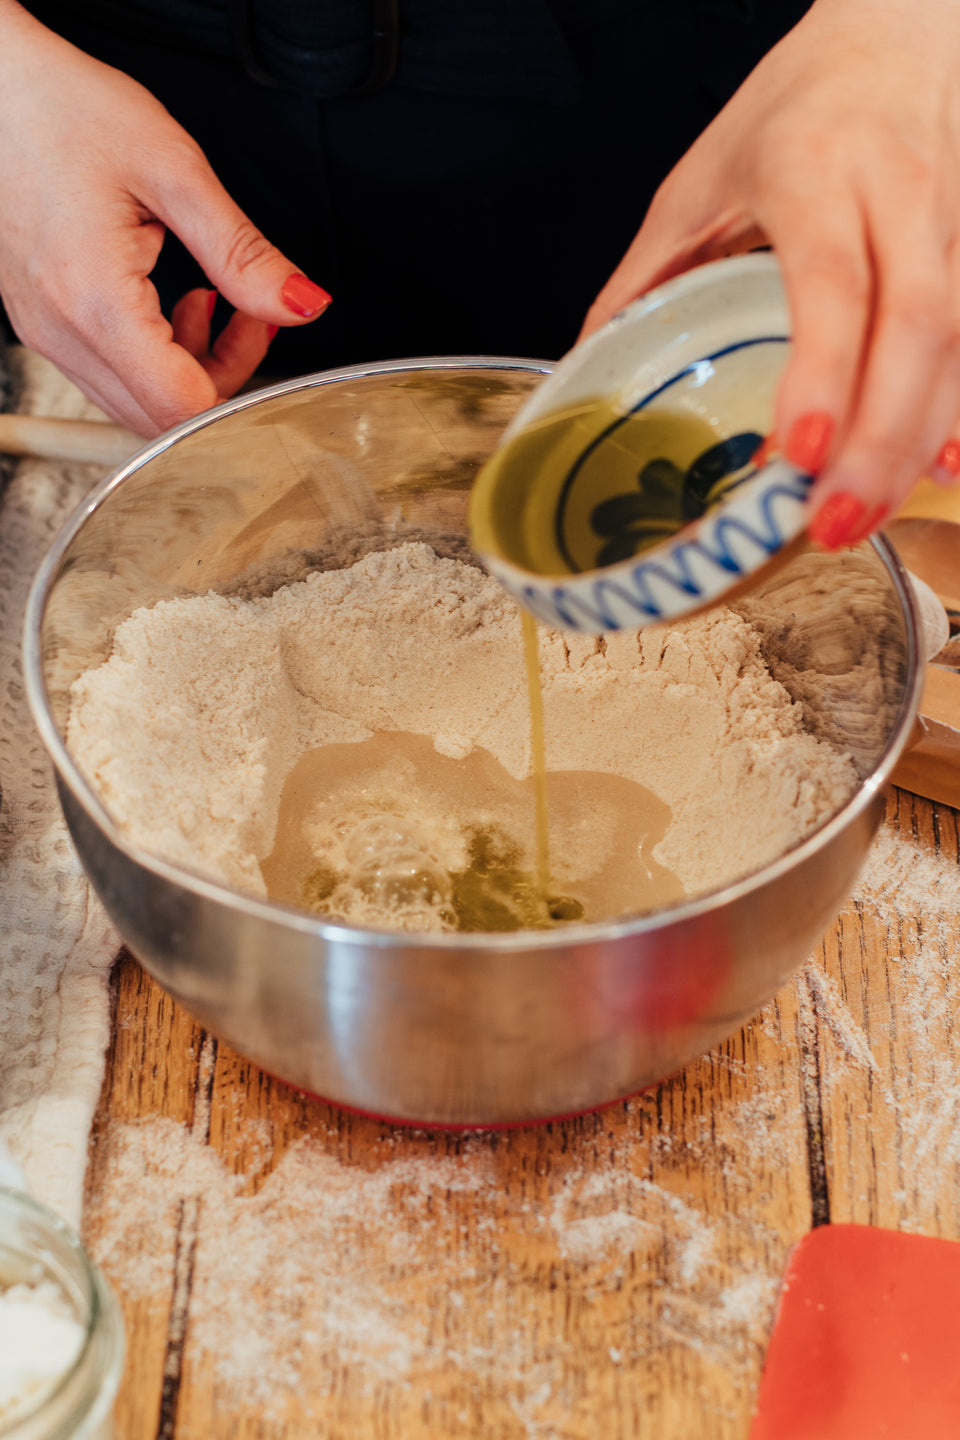 How to bake a bread from the scratch mixing dry ingredients with oil